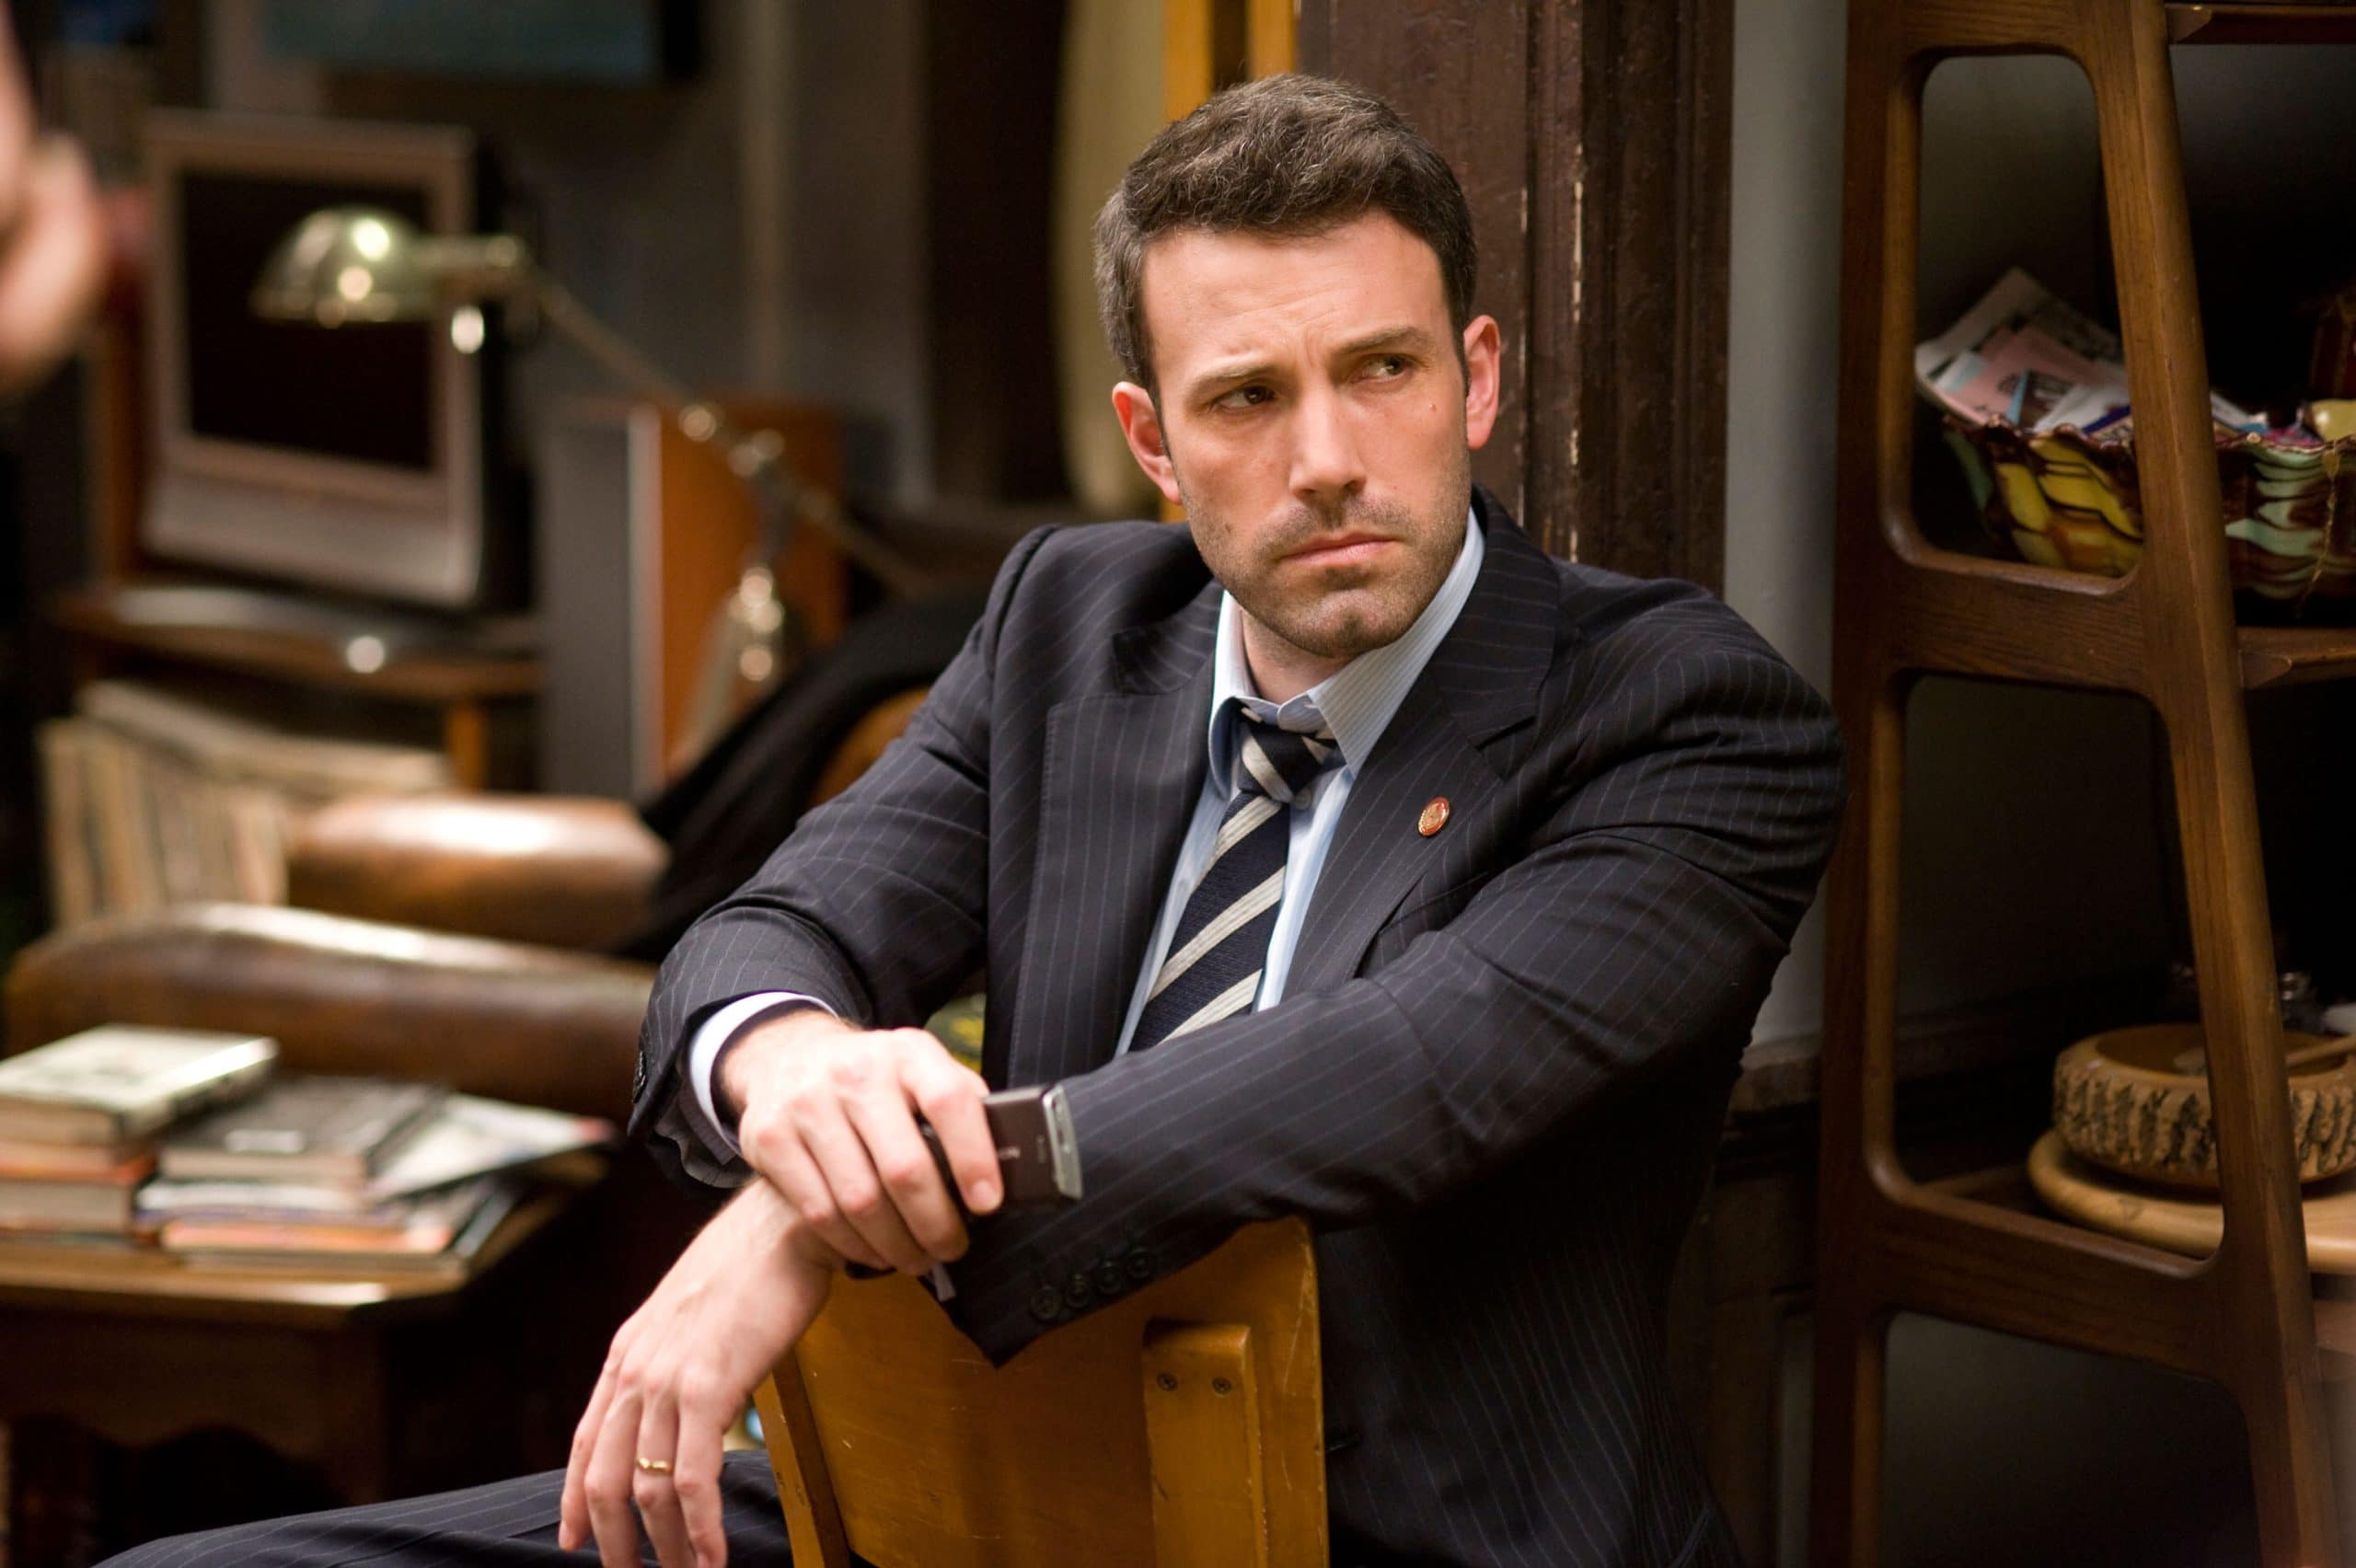 STATE OF PLAY, Ben Affleck, 2009